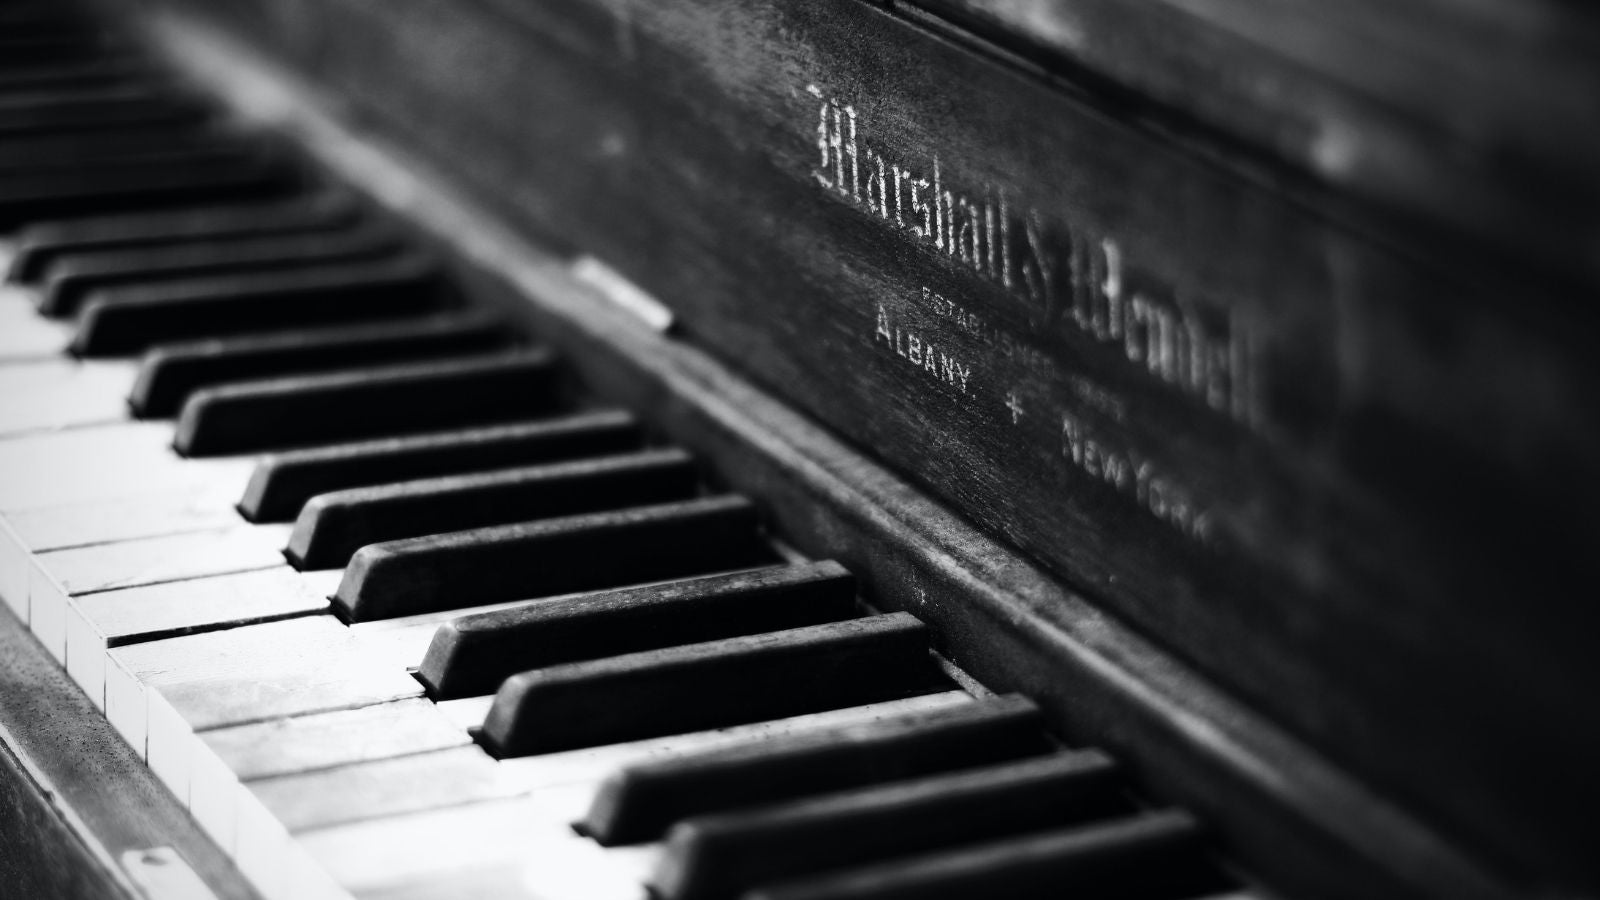 Black and white close up photo of piano keys on a wooden piano